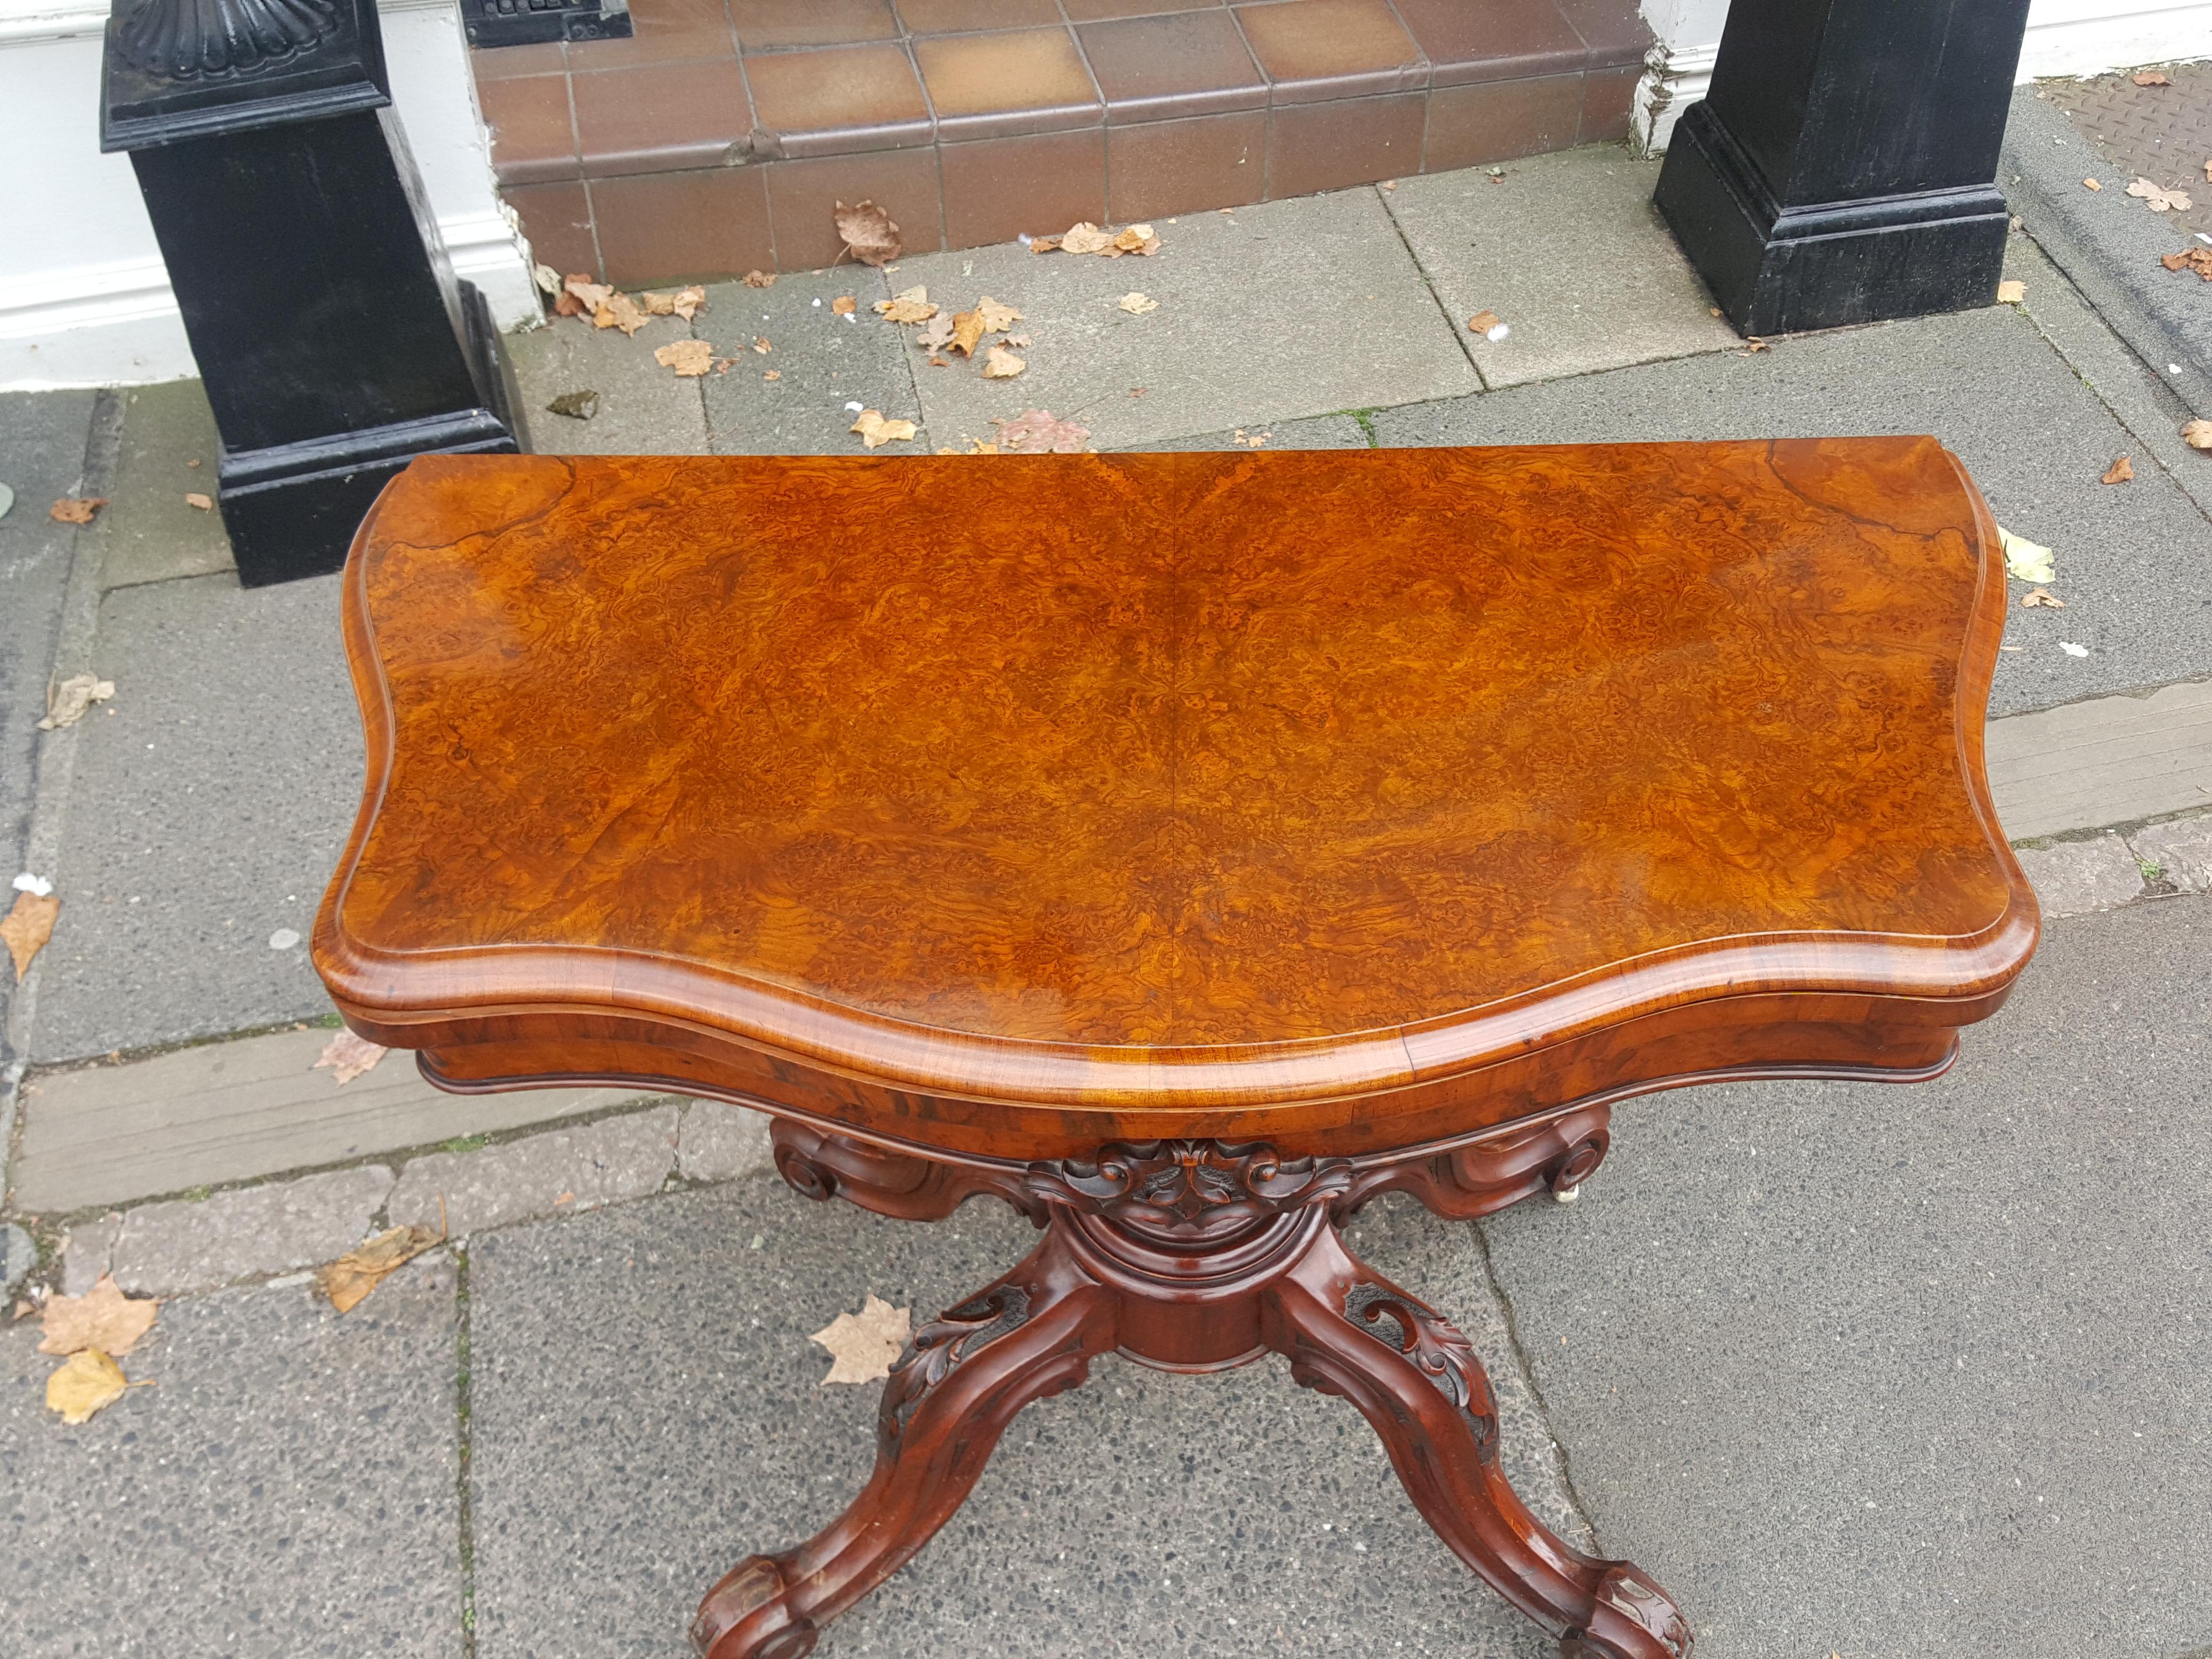 Victorian Burr walnut Serpentine card table with bookmatched veneered top, carved baluster column and scroll legs with pot castors
Measures: 36